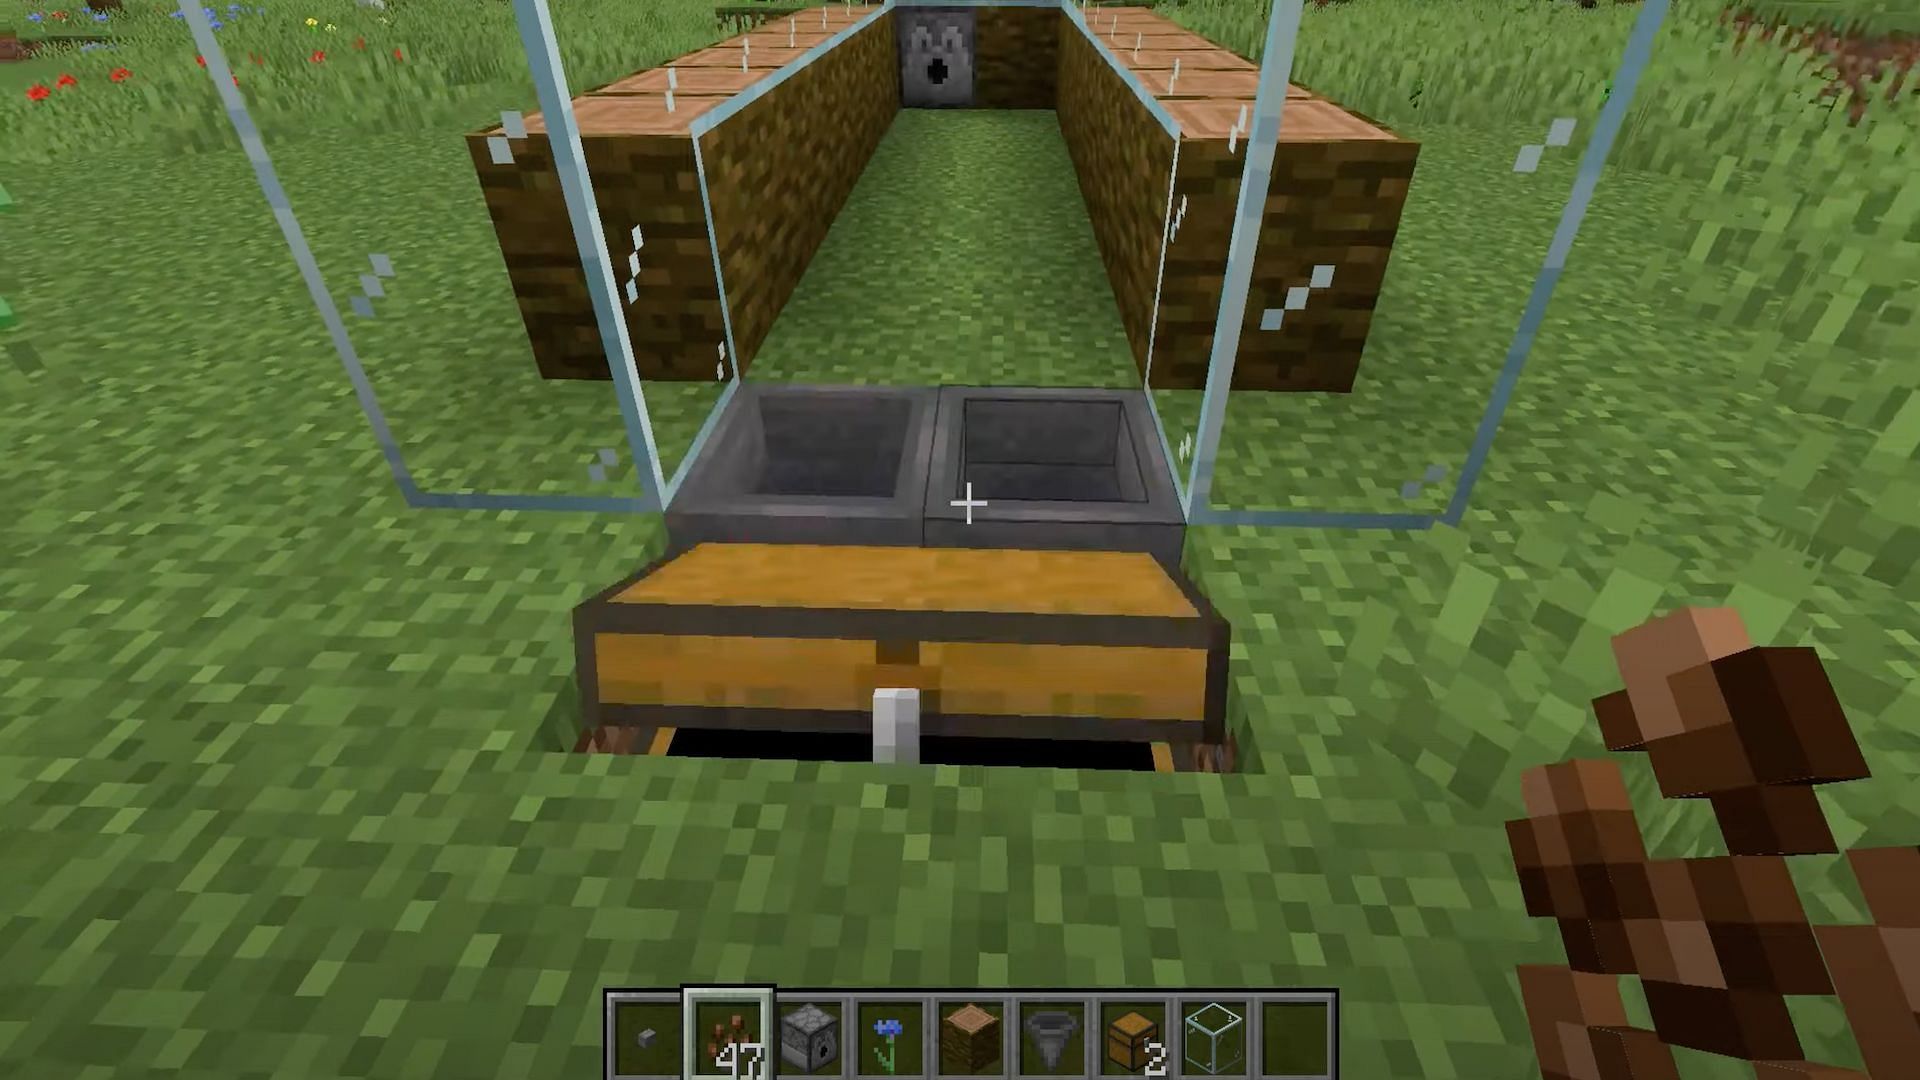 Minecraft players can easily harvest cocoa beans with this easy automatic cocoa bean farm (Image via NaMiature/YouTube)